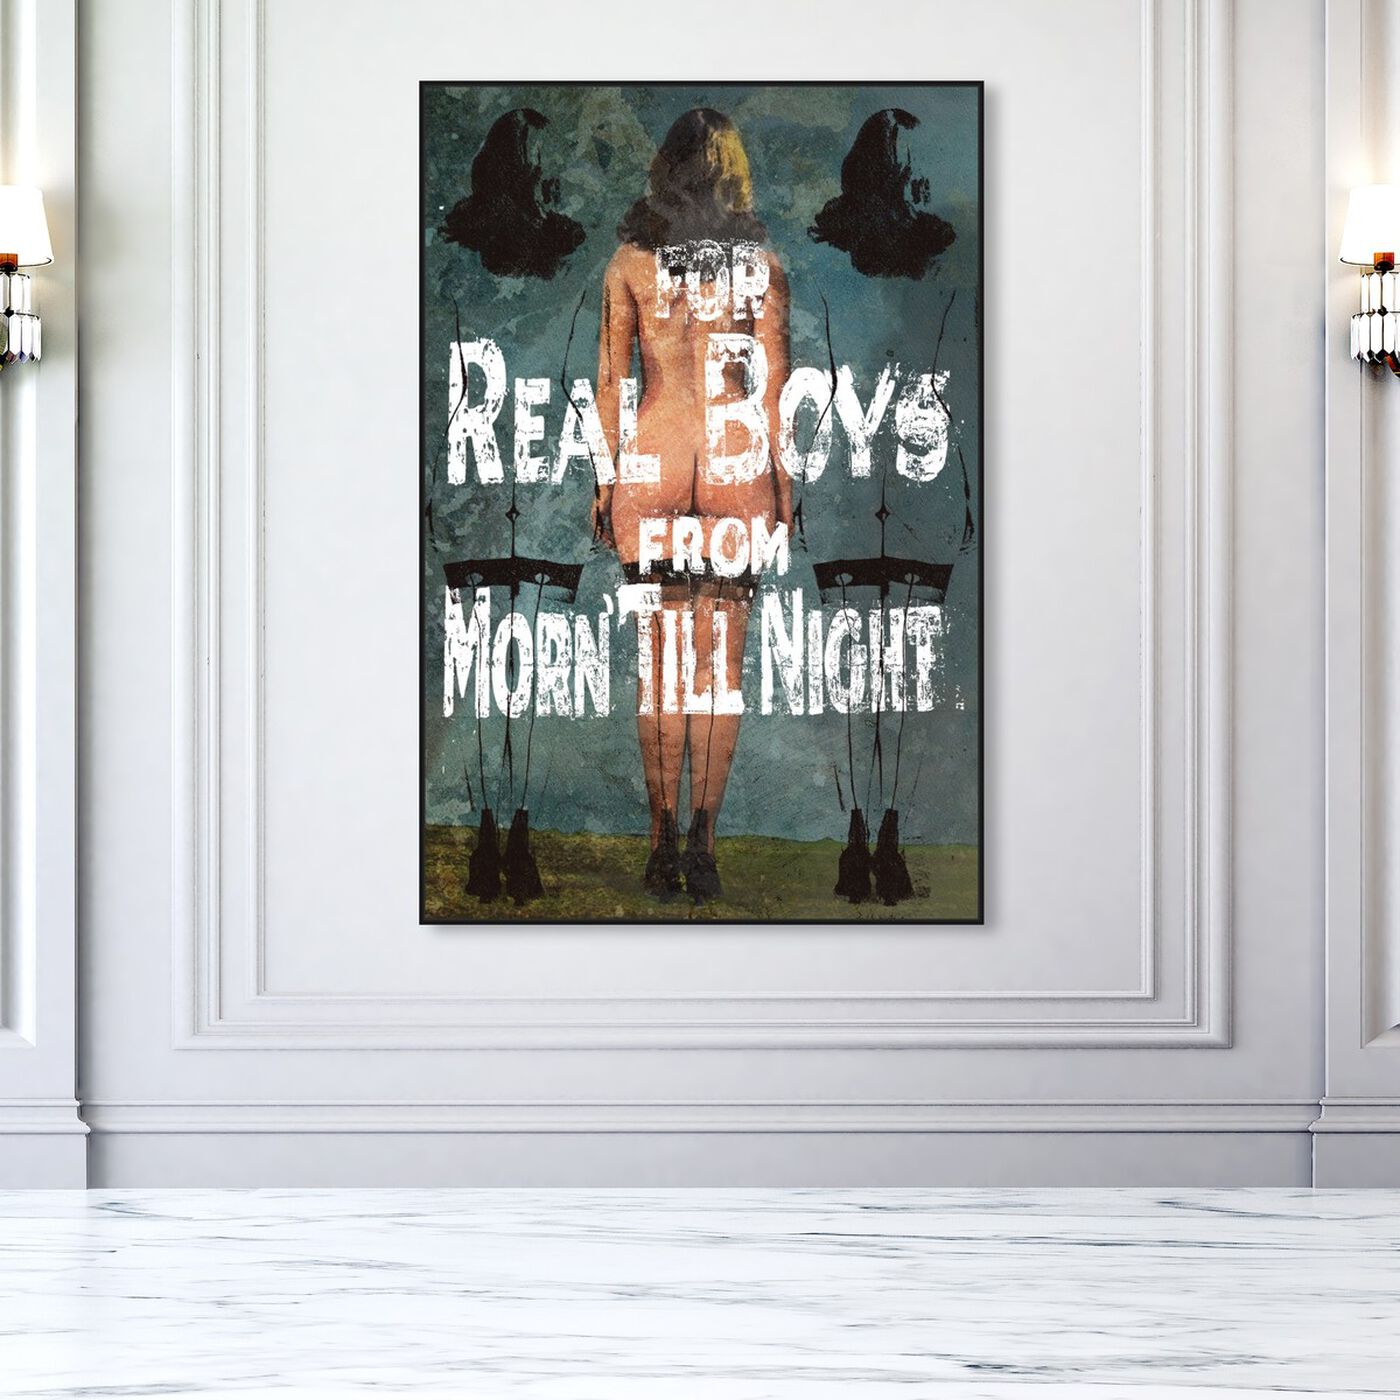 Hanging view of For Real Boys featuring holiday and seasonal and holidays art.